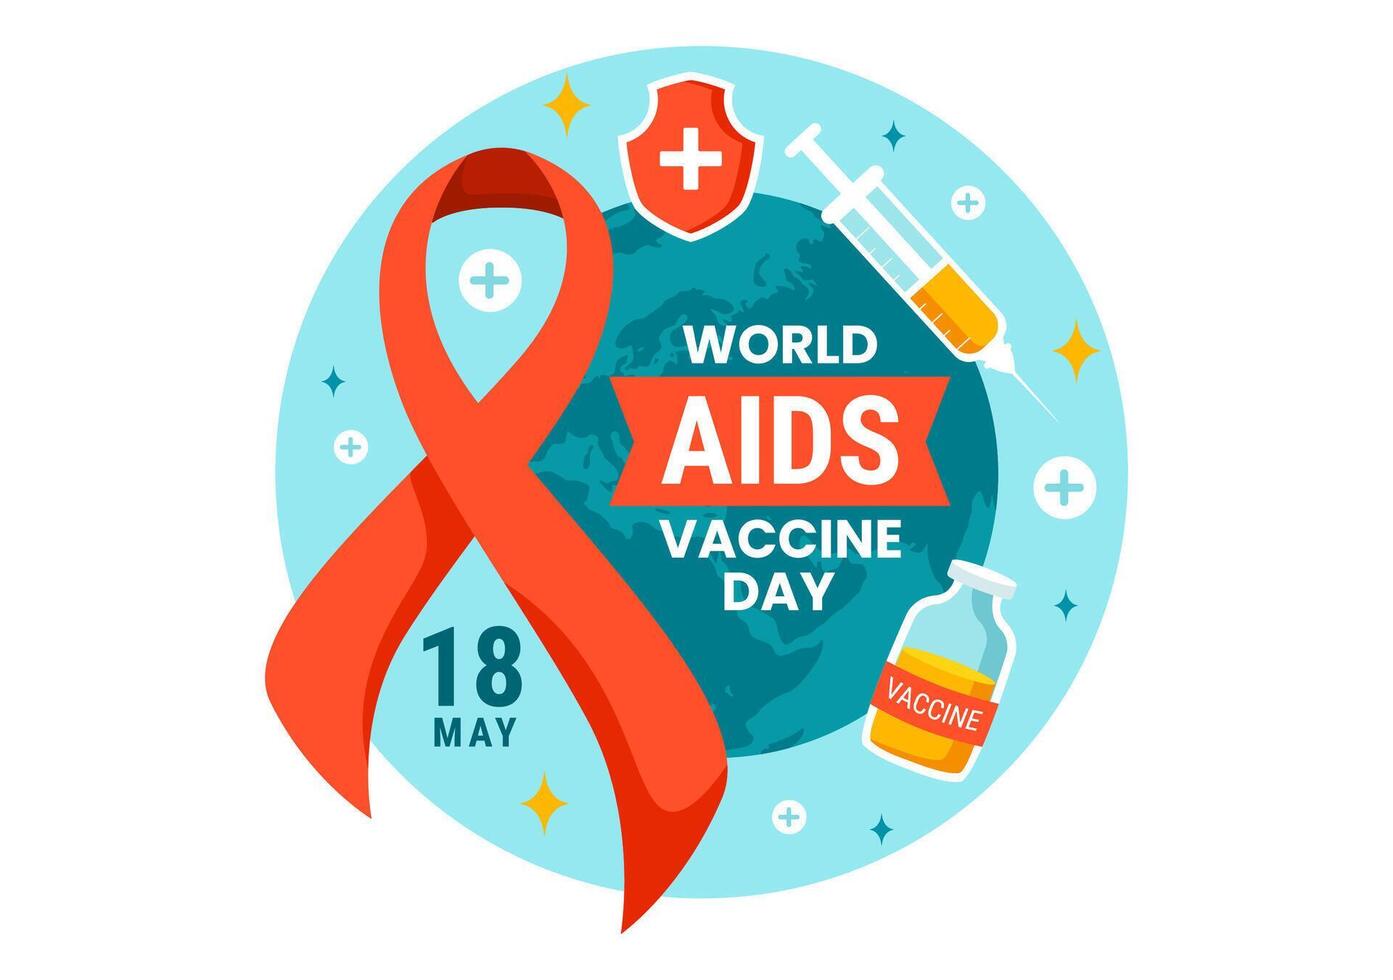 World Aids Vaccine Day Vector Illustration on 18 May with Injection to Prevention and Awareness Health Care in Flat Cartoon Background Design